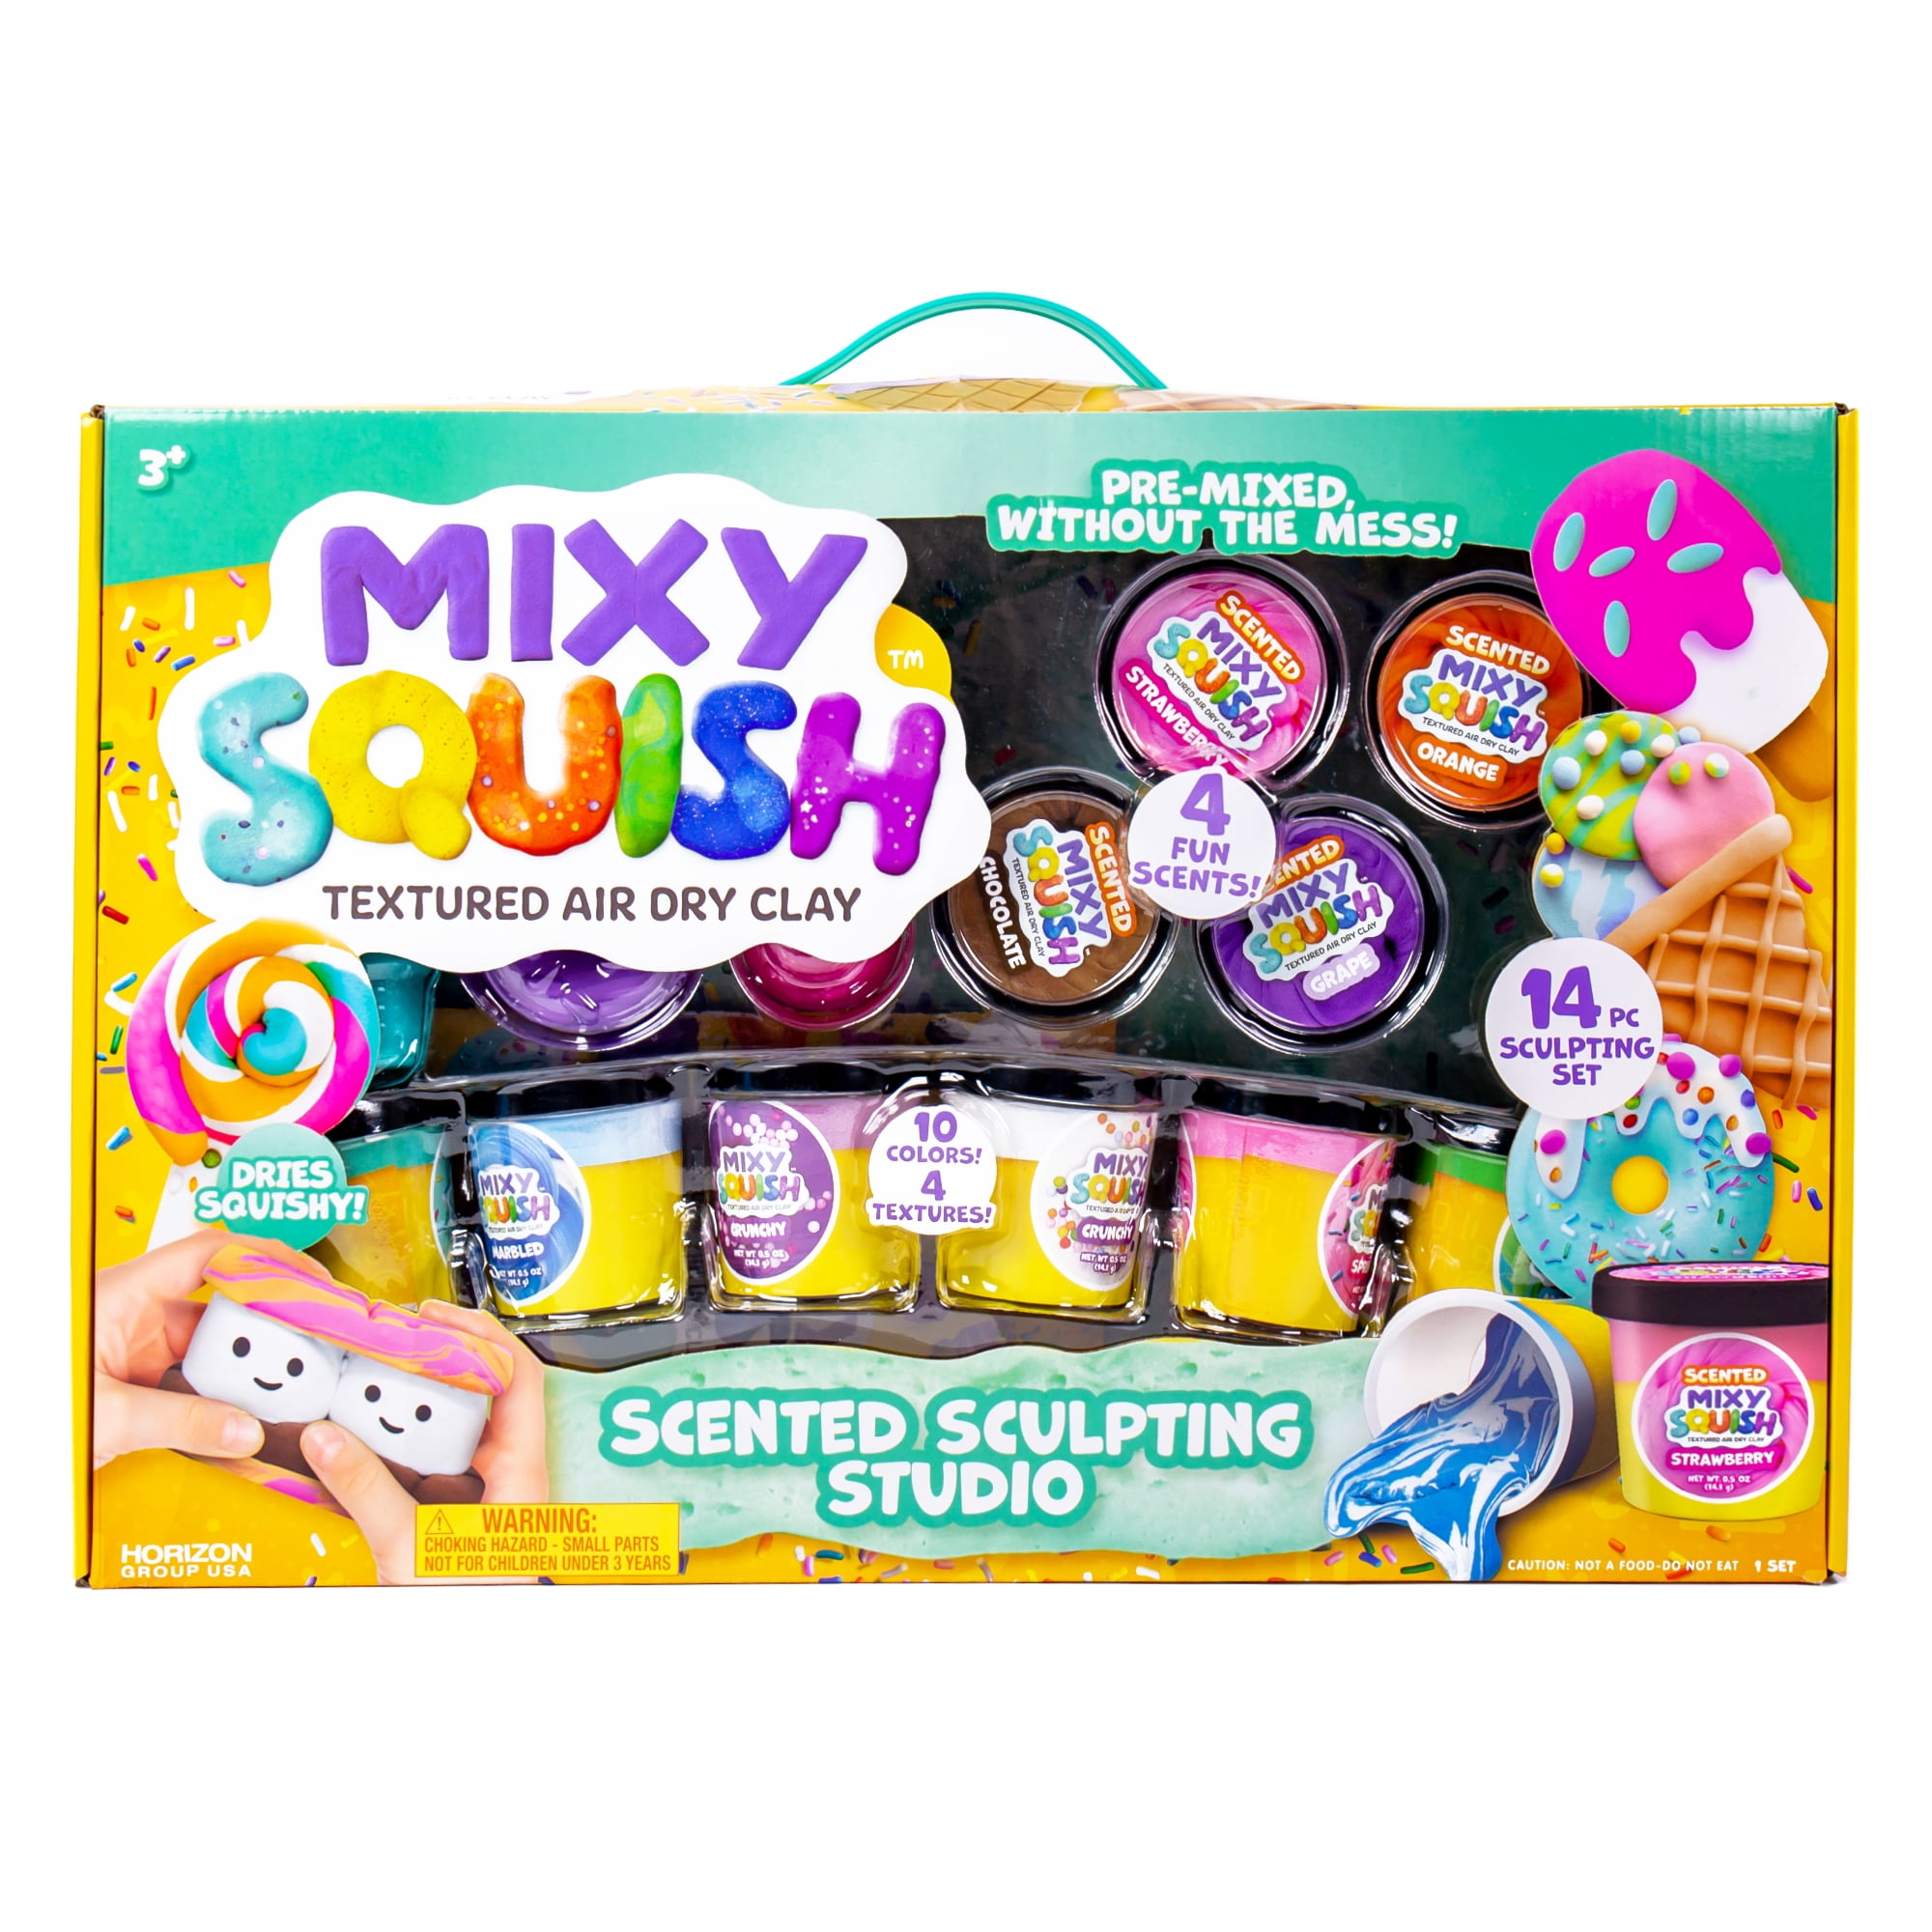 Klutz: DIY Clay Charm Making Kit, Ages 8+